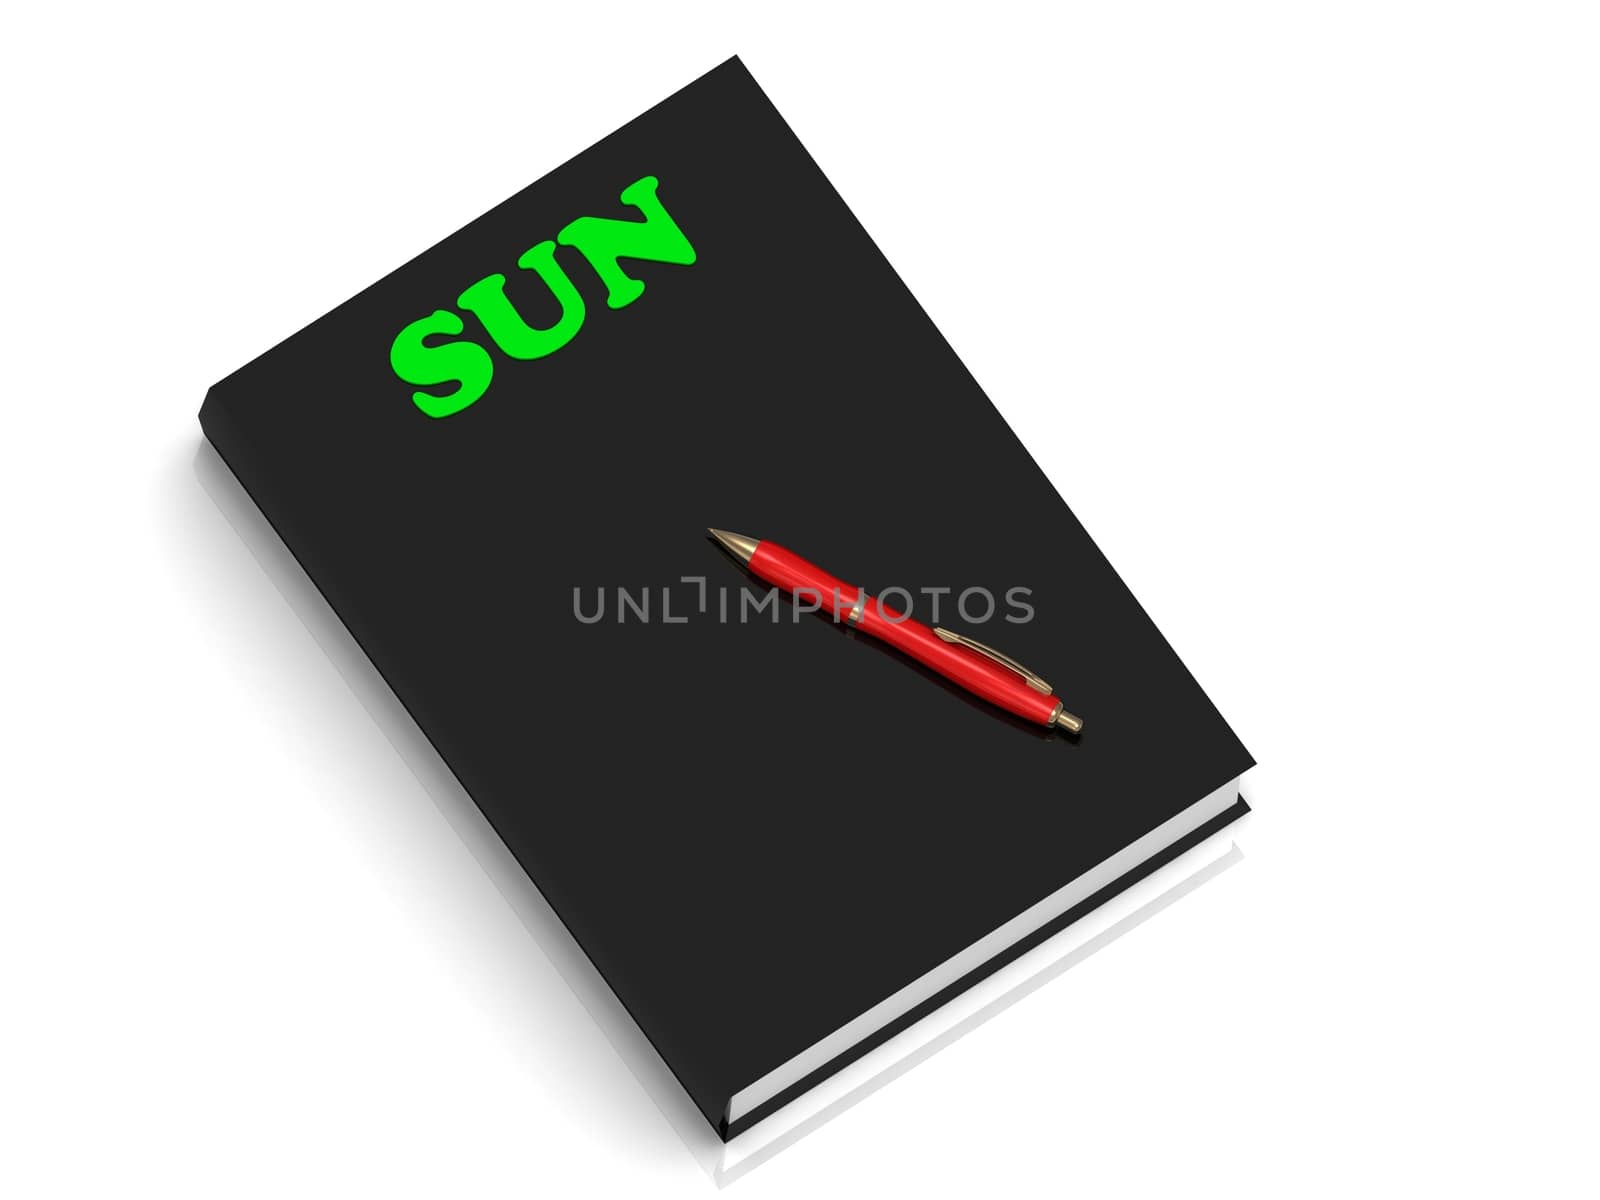 SUN- inscription of green letters on black book by GreenMost